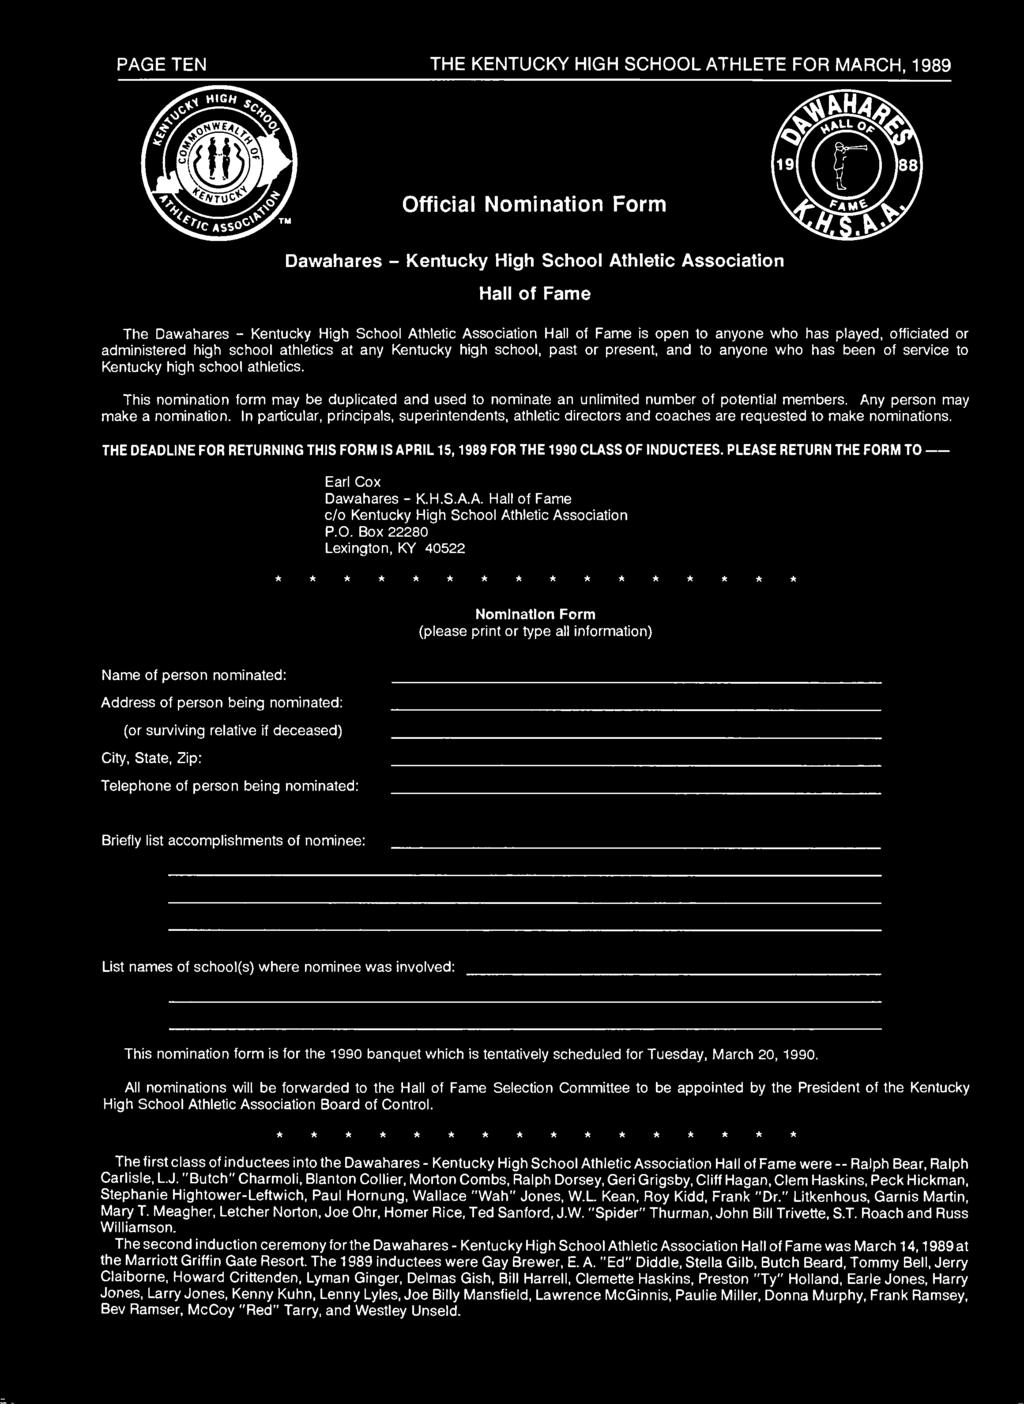 Kentucky high school athletics. This nomination form may be duplicated and used to nominate an unlimited number of potential members. Any person may make a nomination.